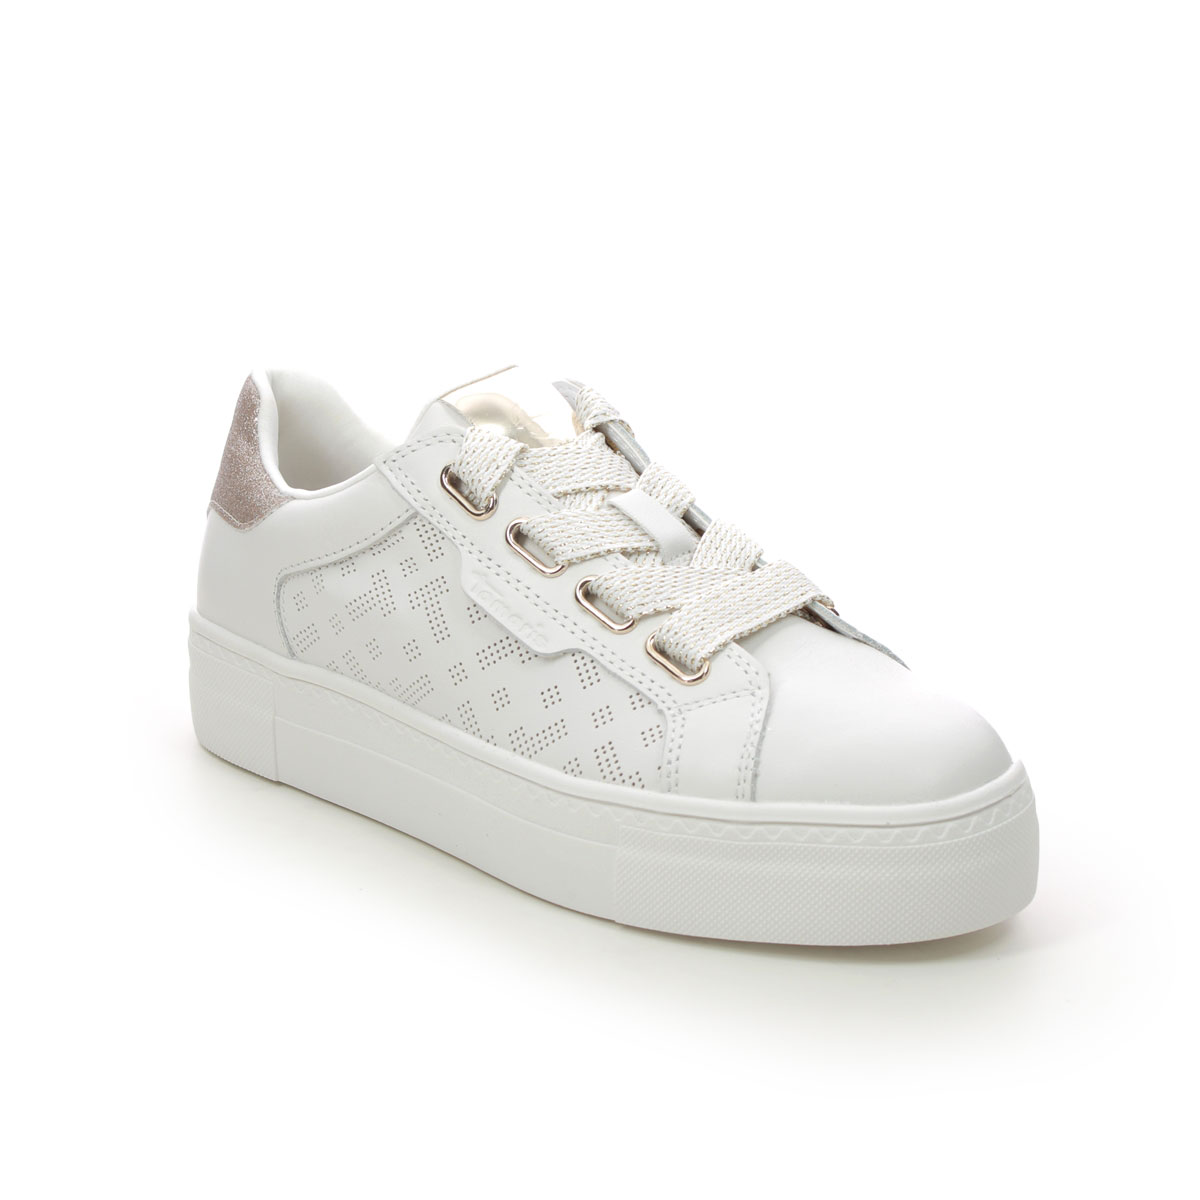 Tamaris Lima White Gold Womens Trainers 23707-20-190 In Size 40 In Plain White Gold